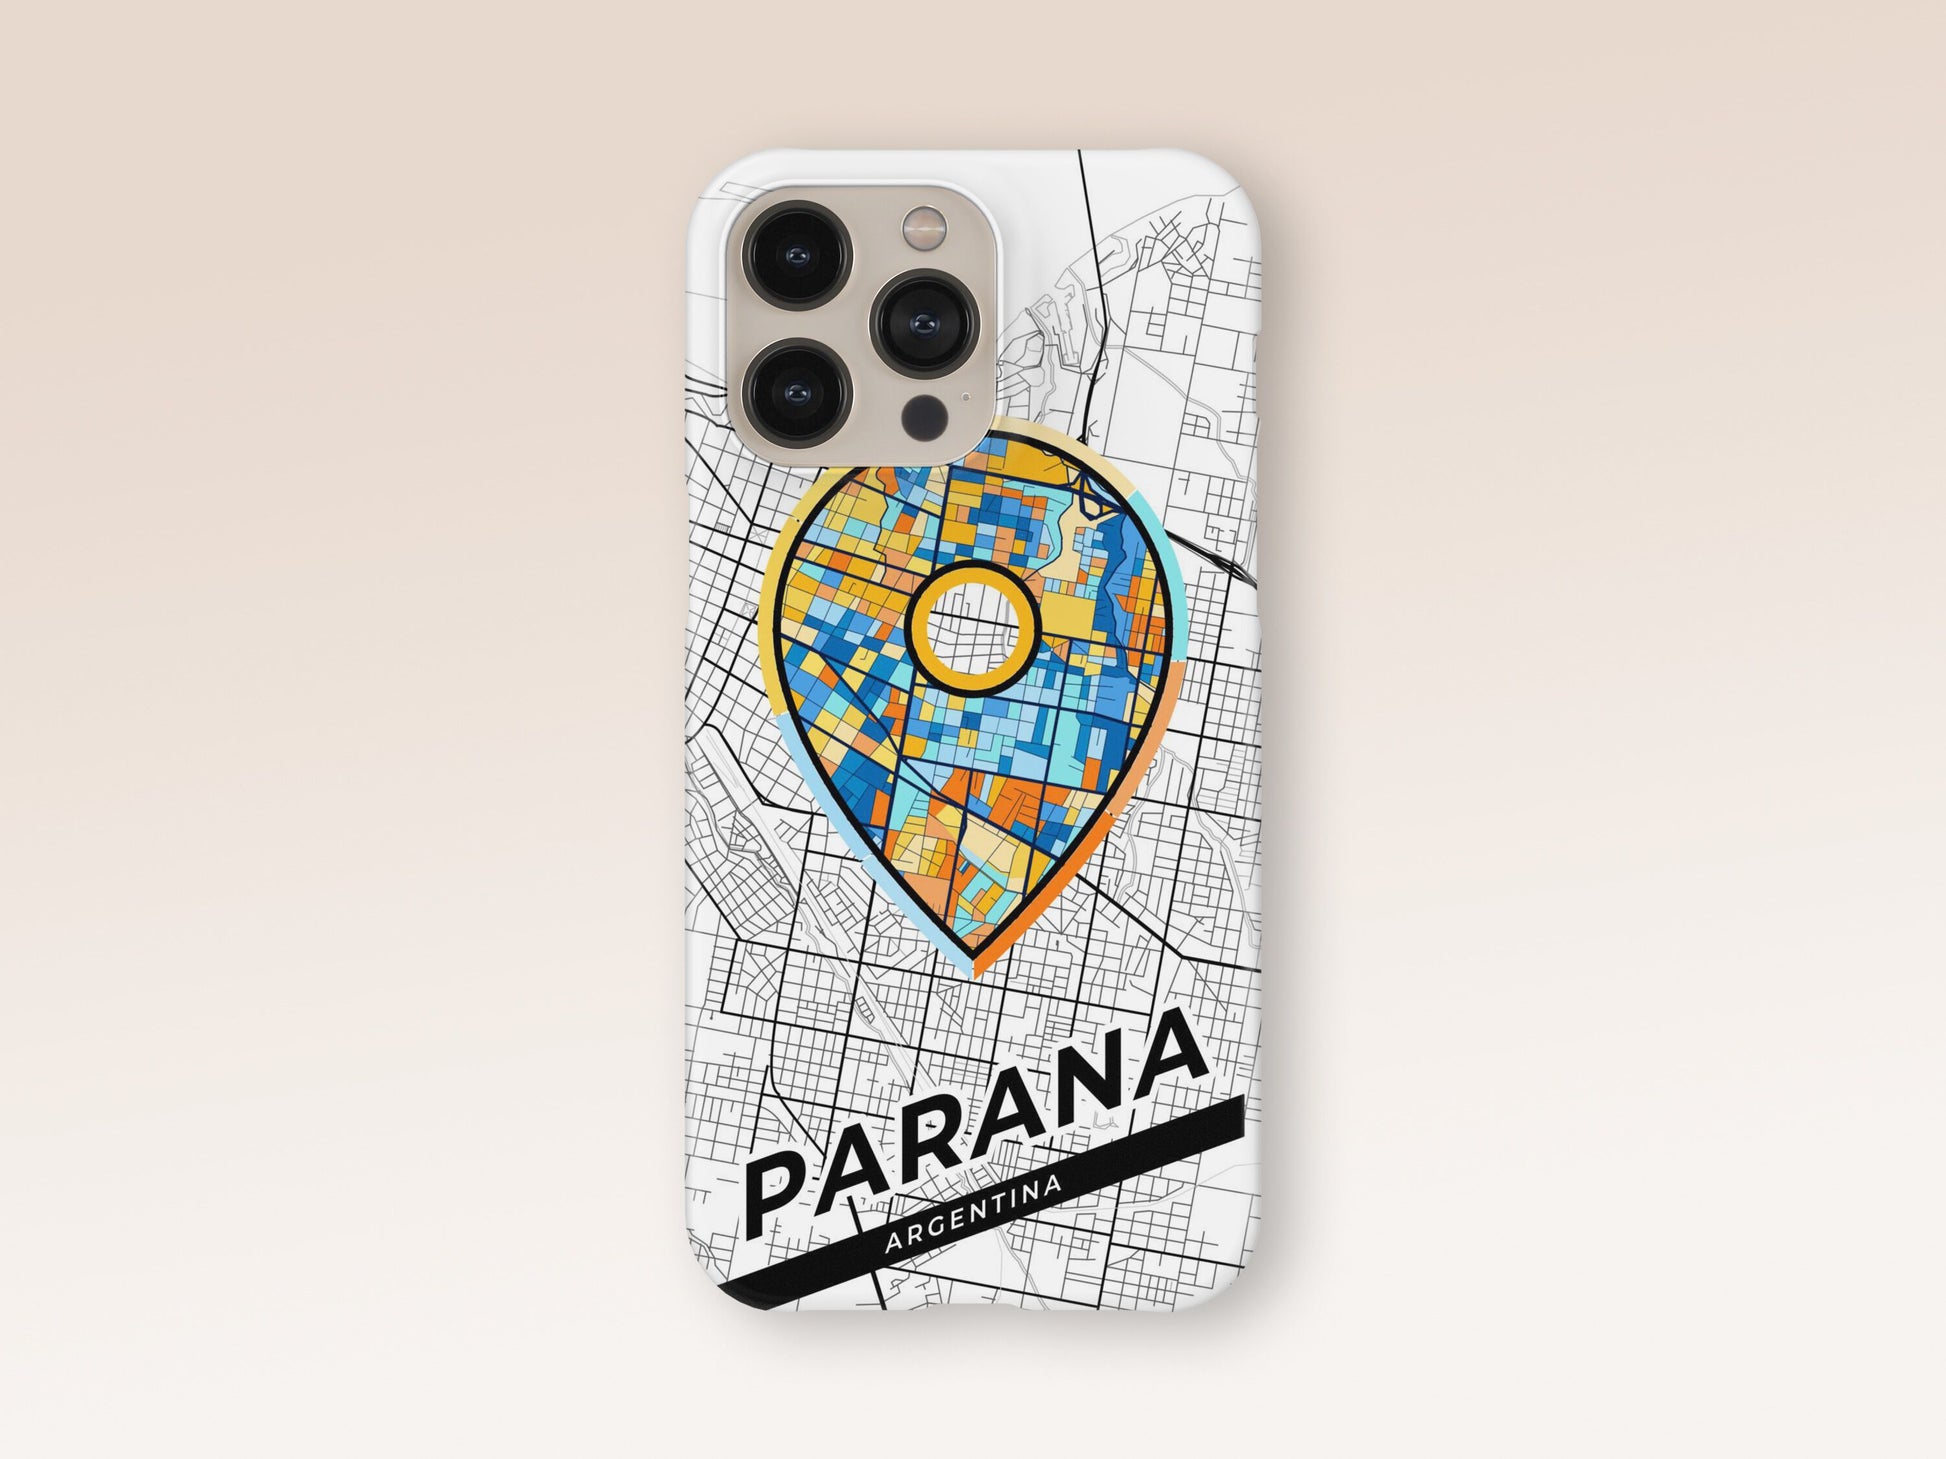 Parana Argentina slim phone case with colorful icon 1